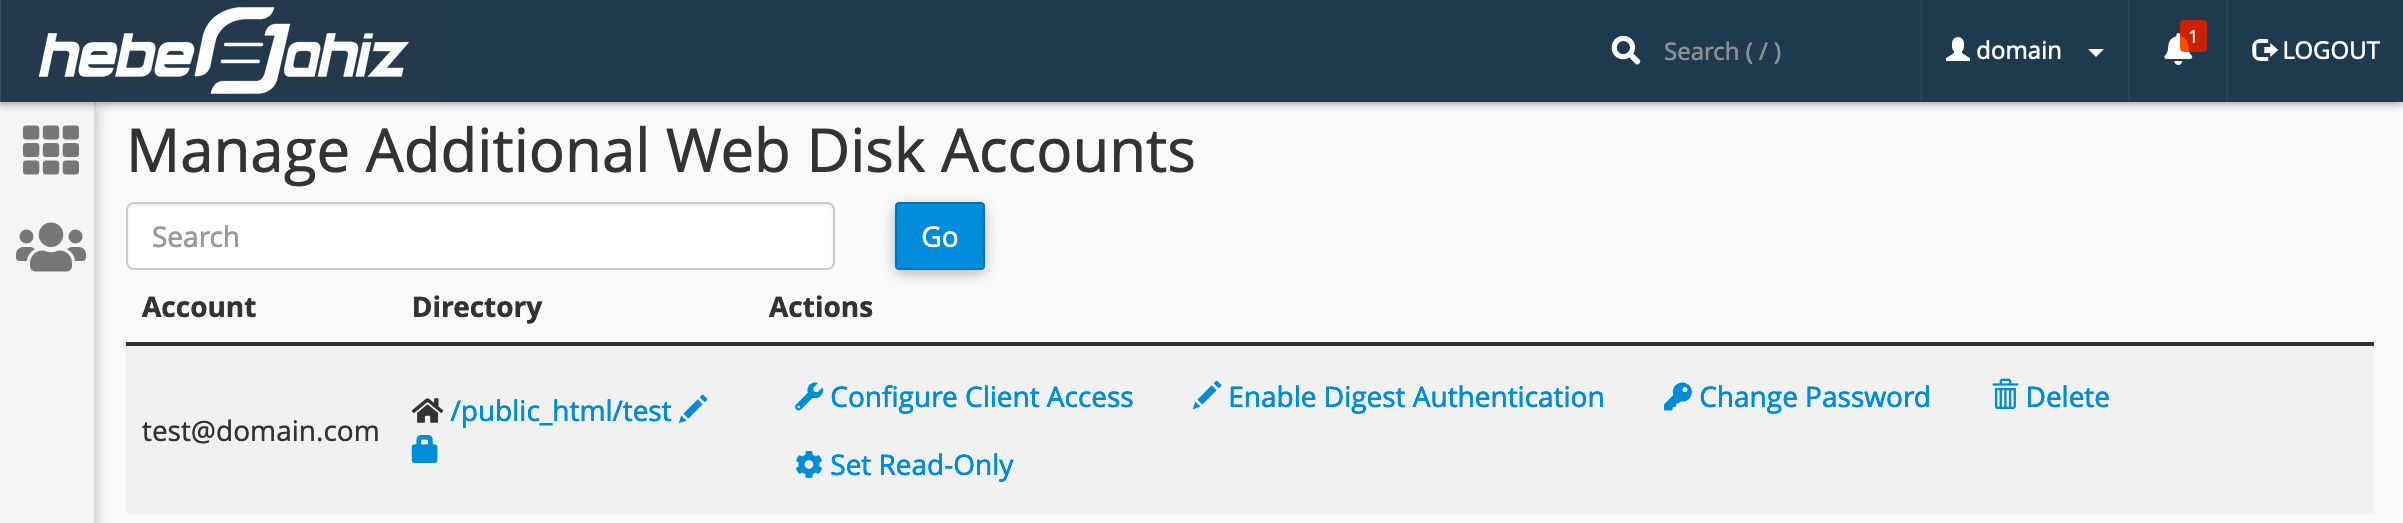 cPanel : Manage Additional Web Disk Account